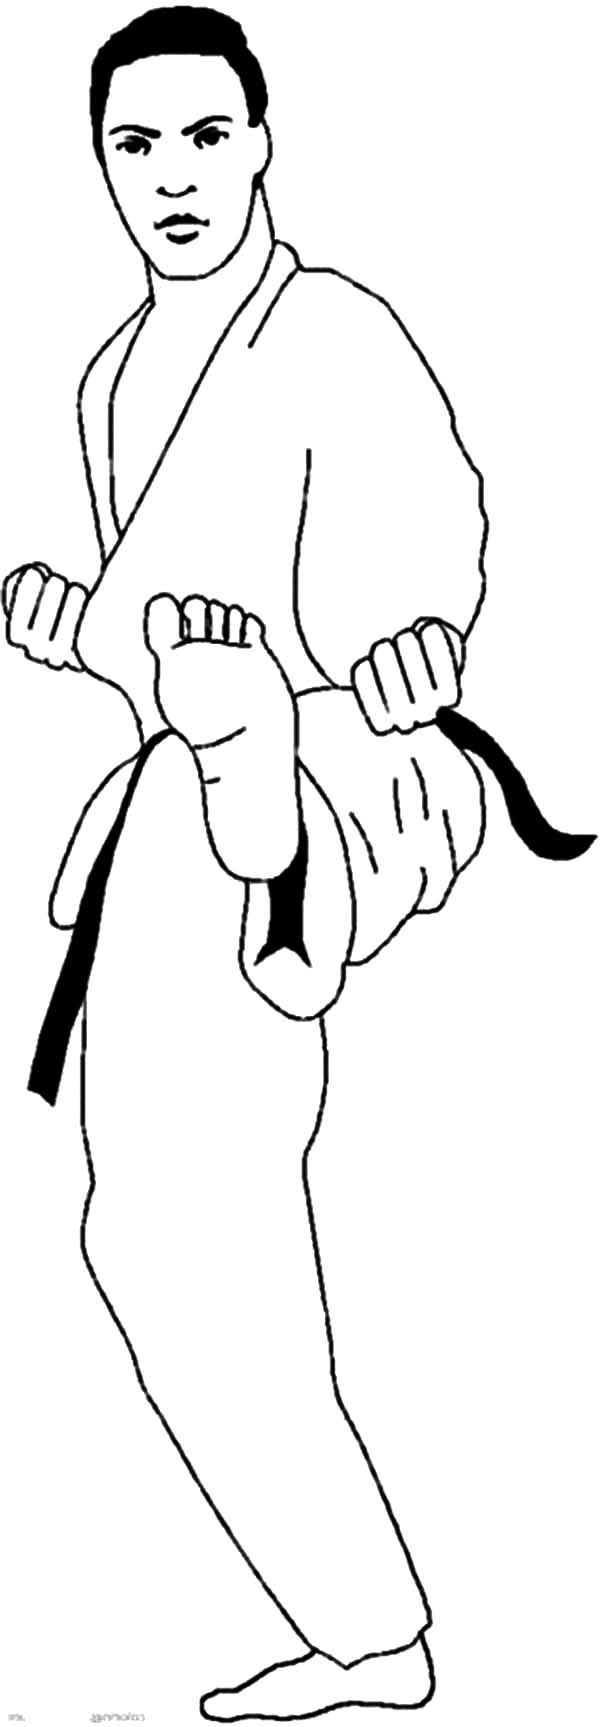 Karate Strong Foot Kick Coloring Pages | Batch Coloring